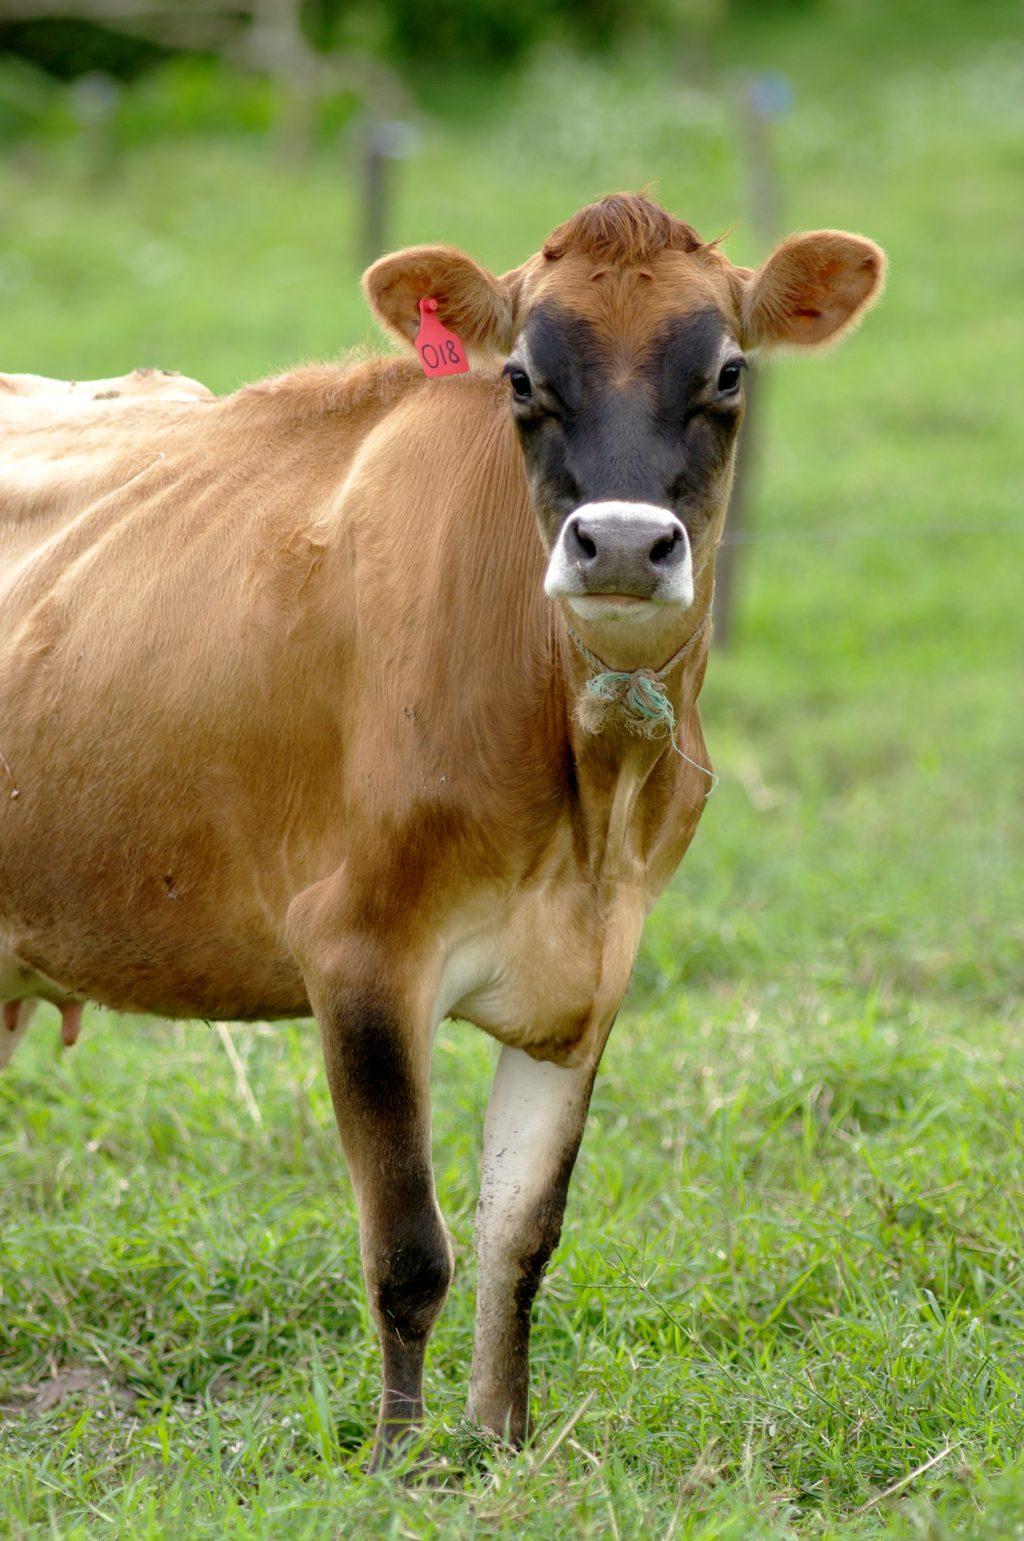 Cow in a pasture - Texas Landowners Association